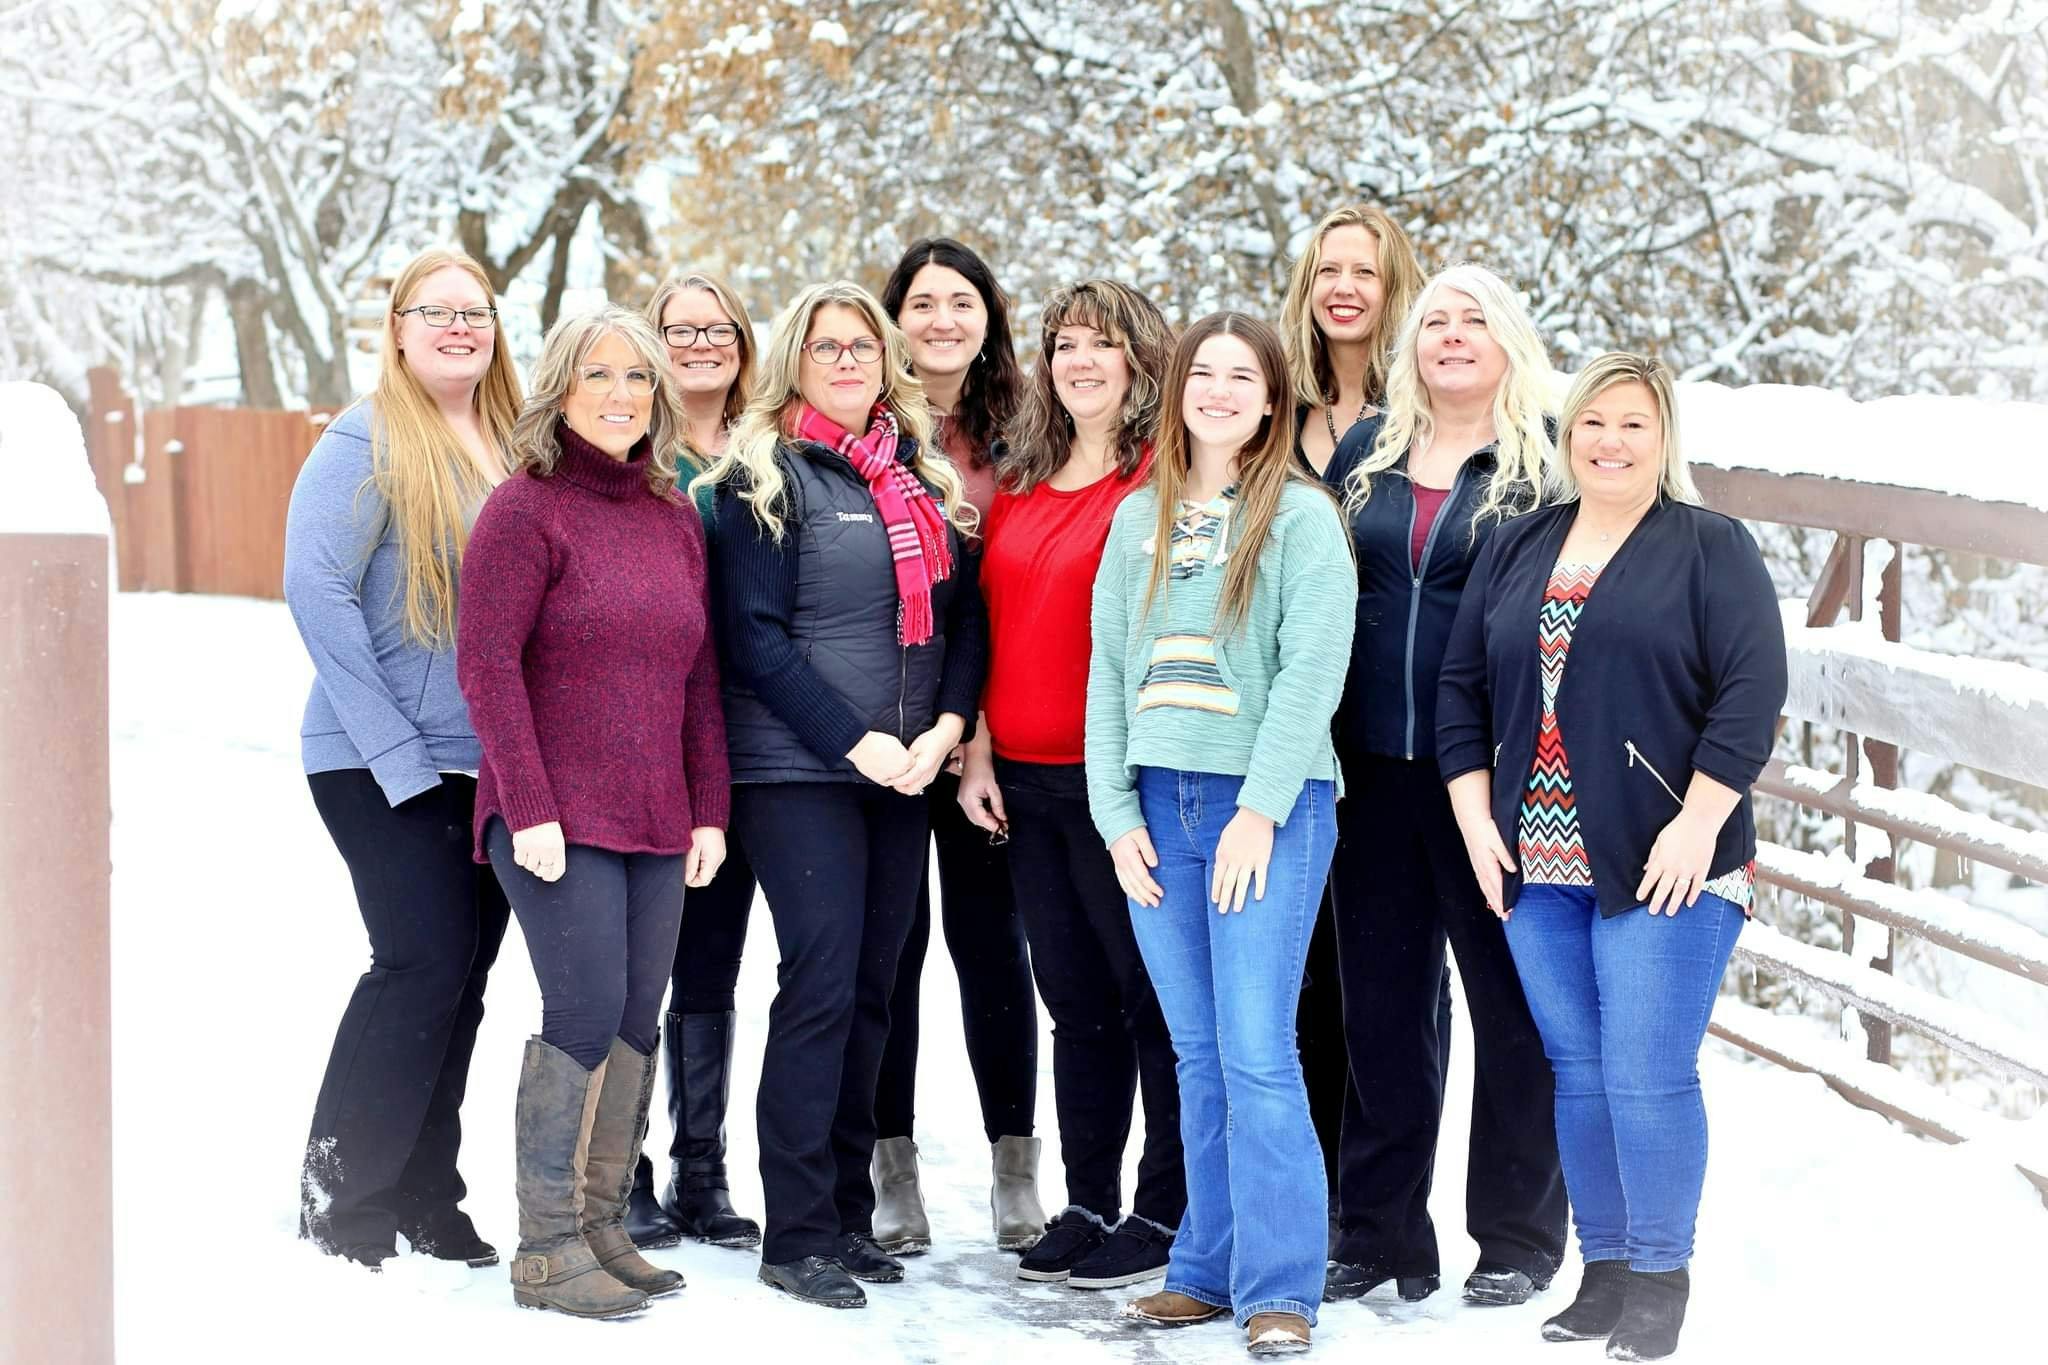 a group of women posing for a photo in the snow